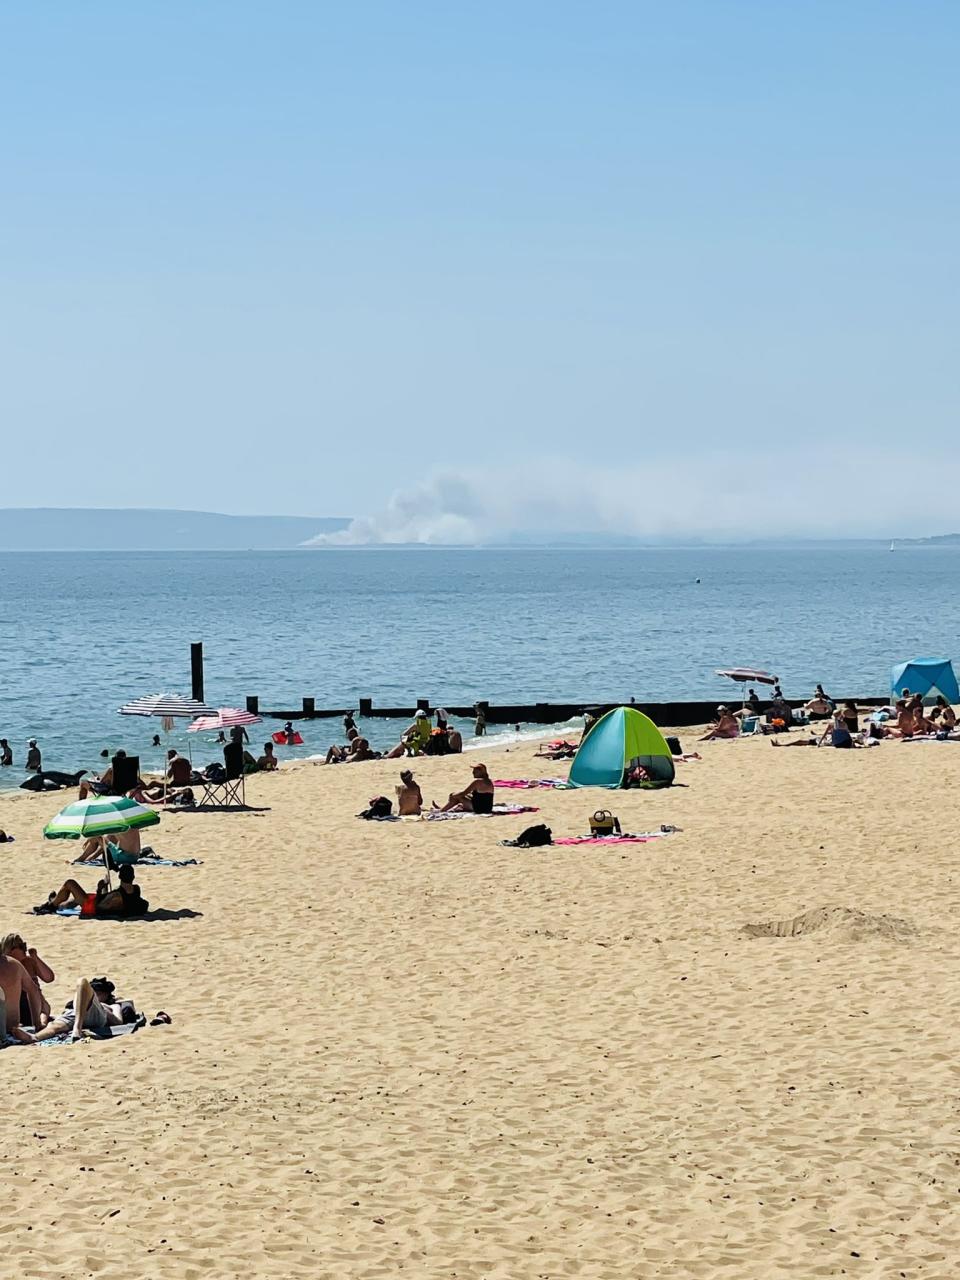 The fire can be seen from Southbourne in Bournemouth. (Geoff zzzzzz)